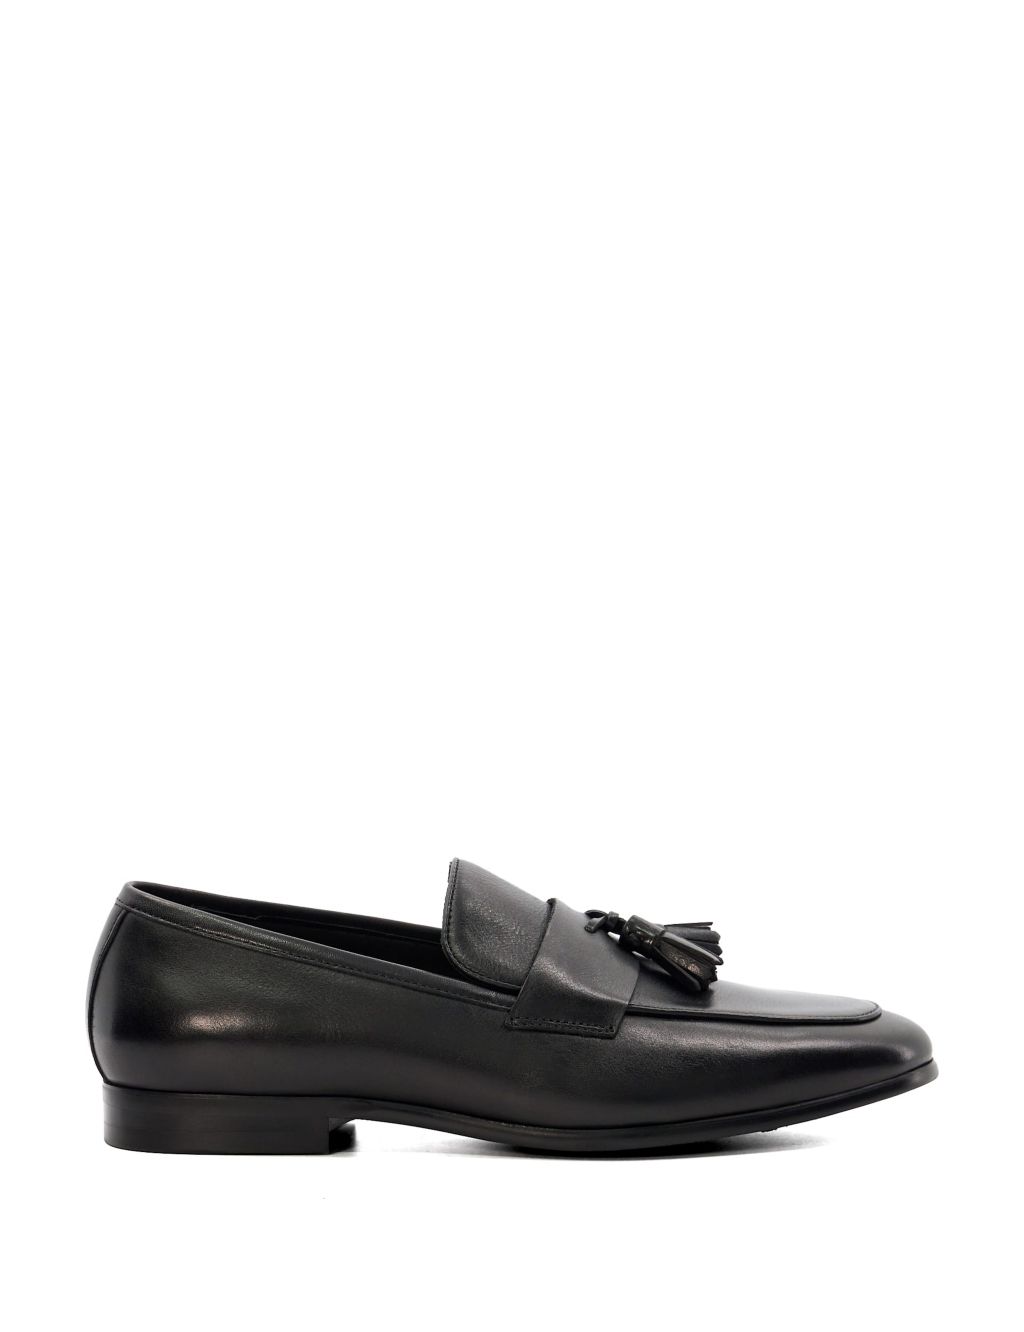 Men’s Smart Loafers Available at M&S